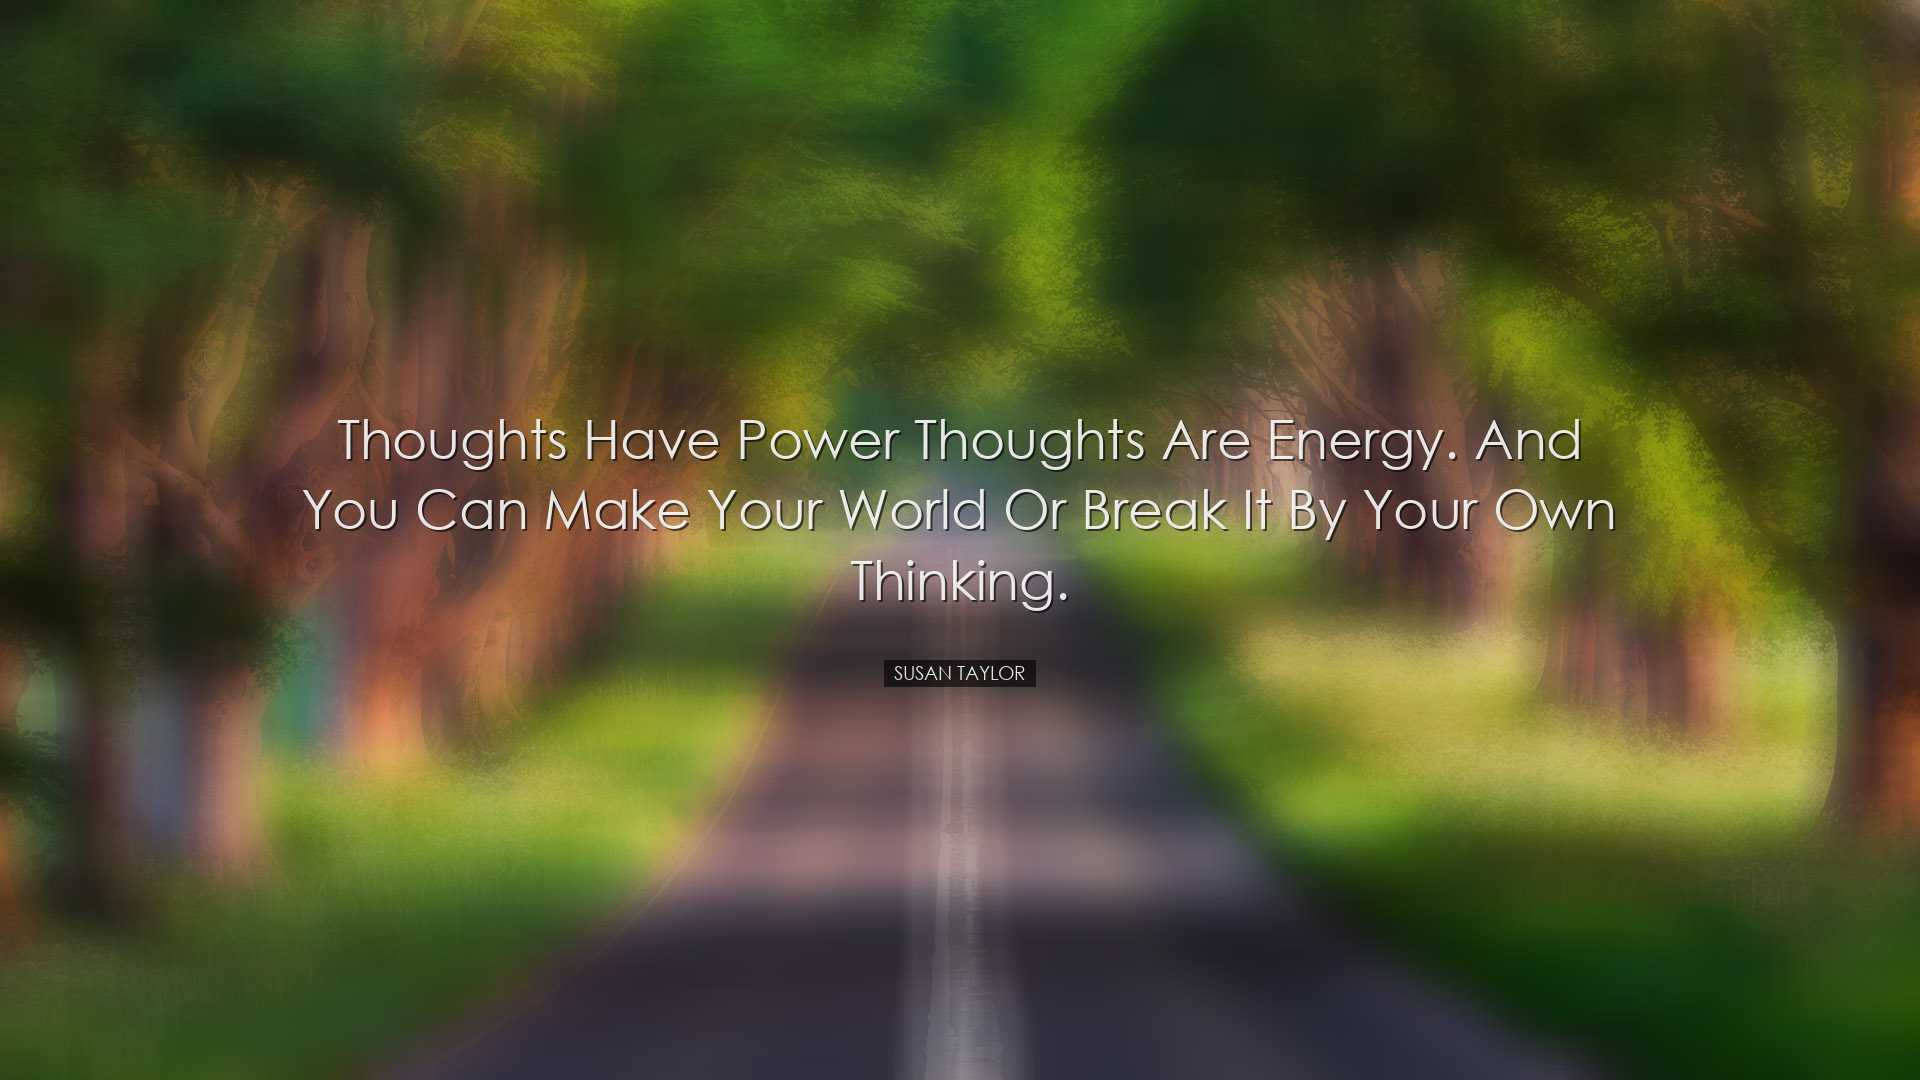 Thoughts have power thoughts are energy. And you can make your wor